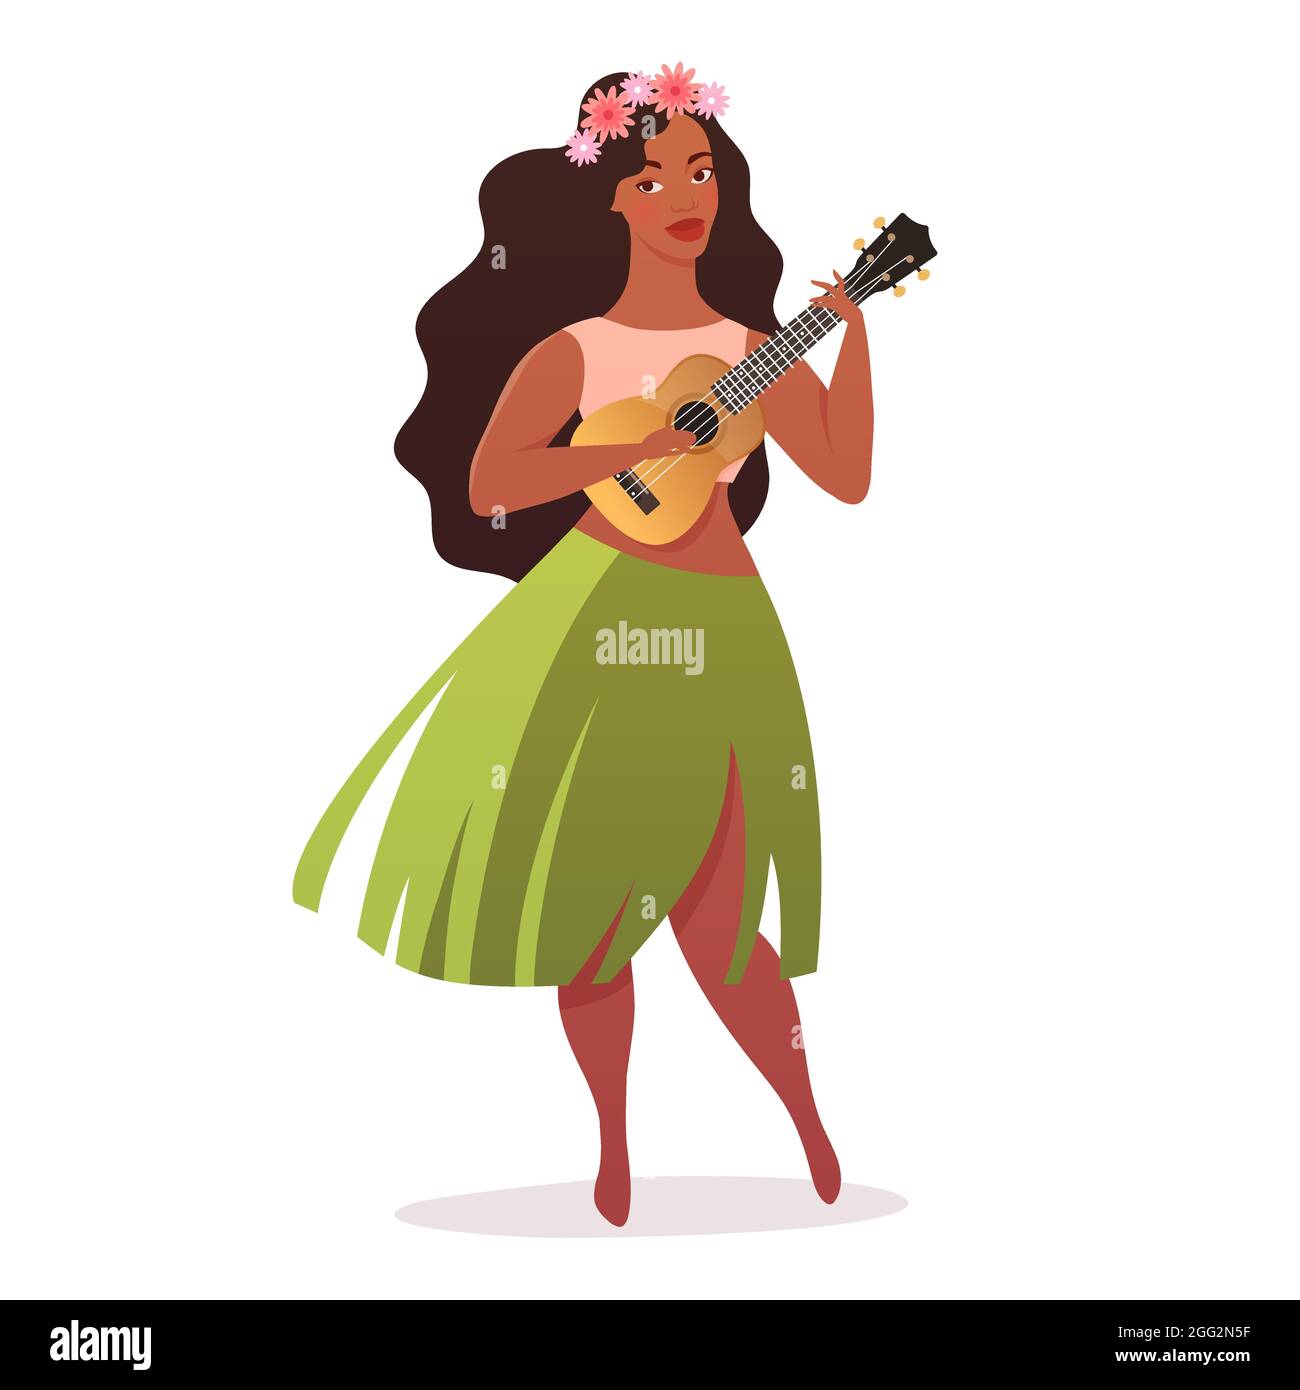 Young woman hula dancer in traditional hawaiian skirt with ukulele guitar. Vector illustration isolated on white background. Stock Vector